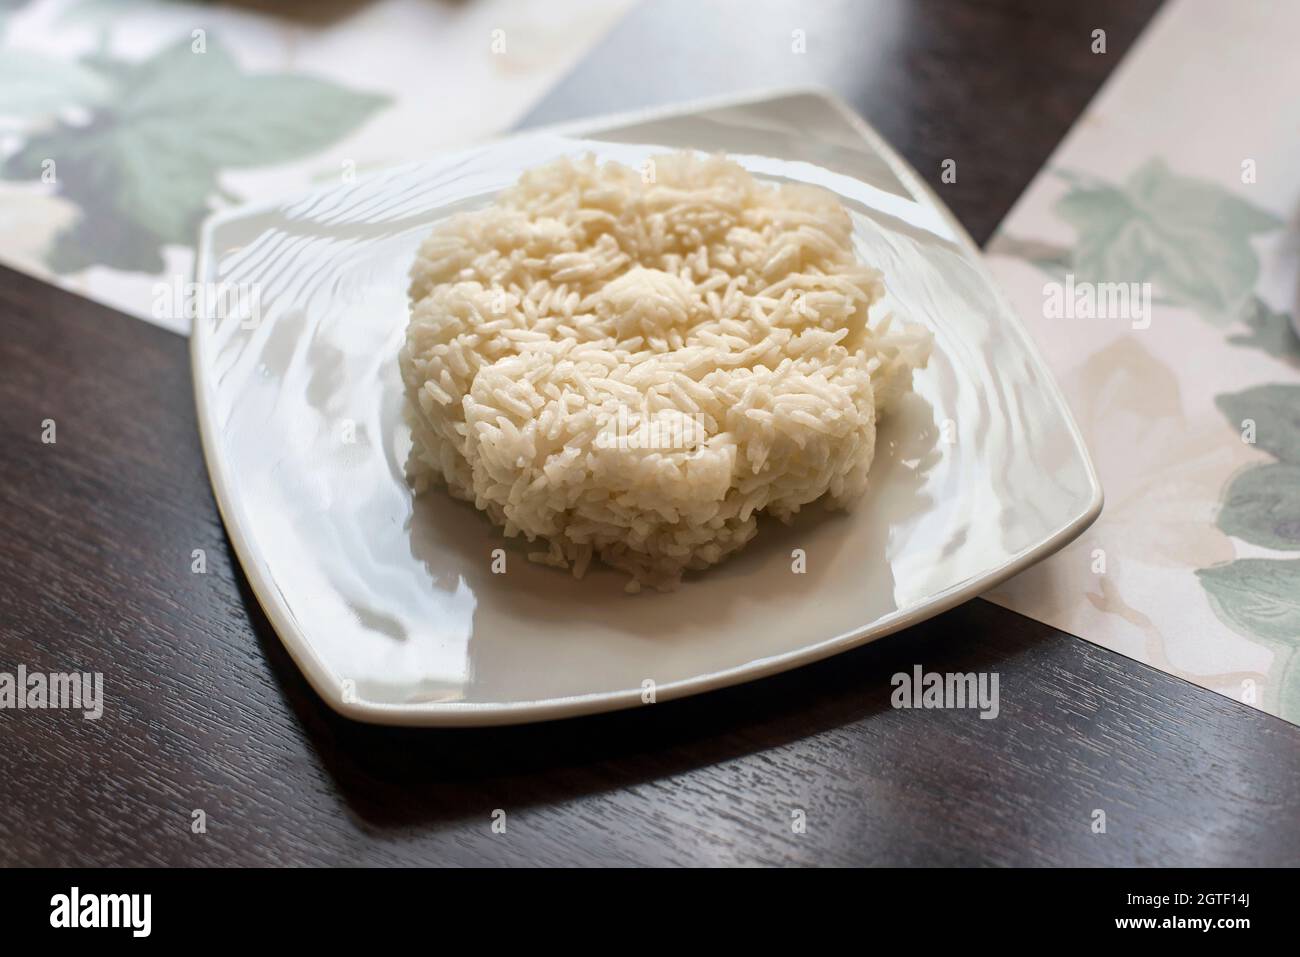 High Angle View Of Steamed Rice In Plate On Table Stock Photo